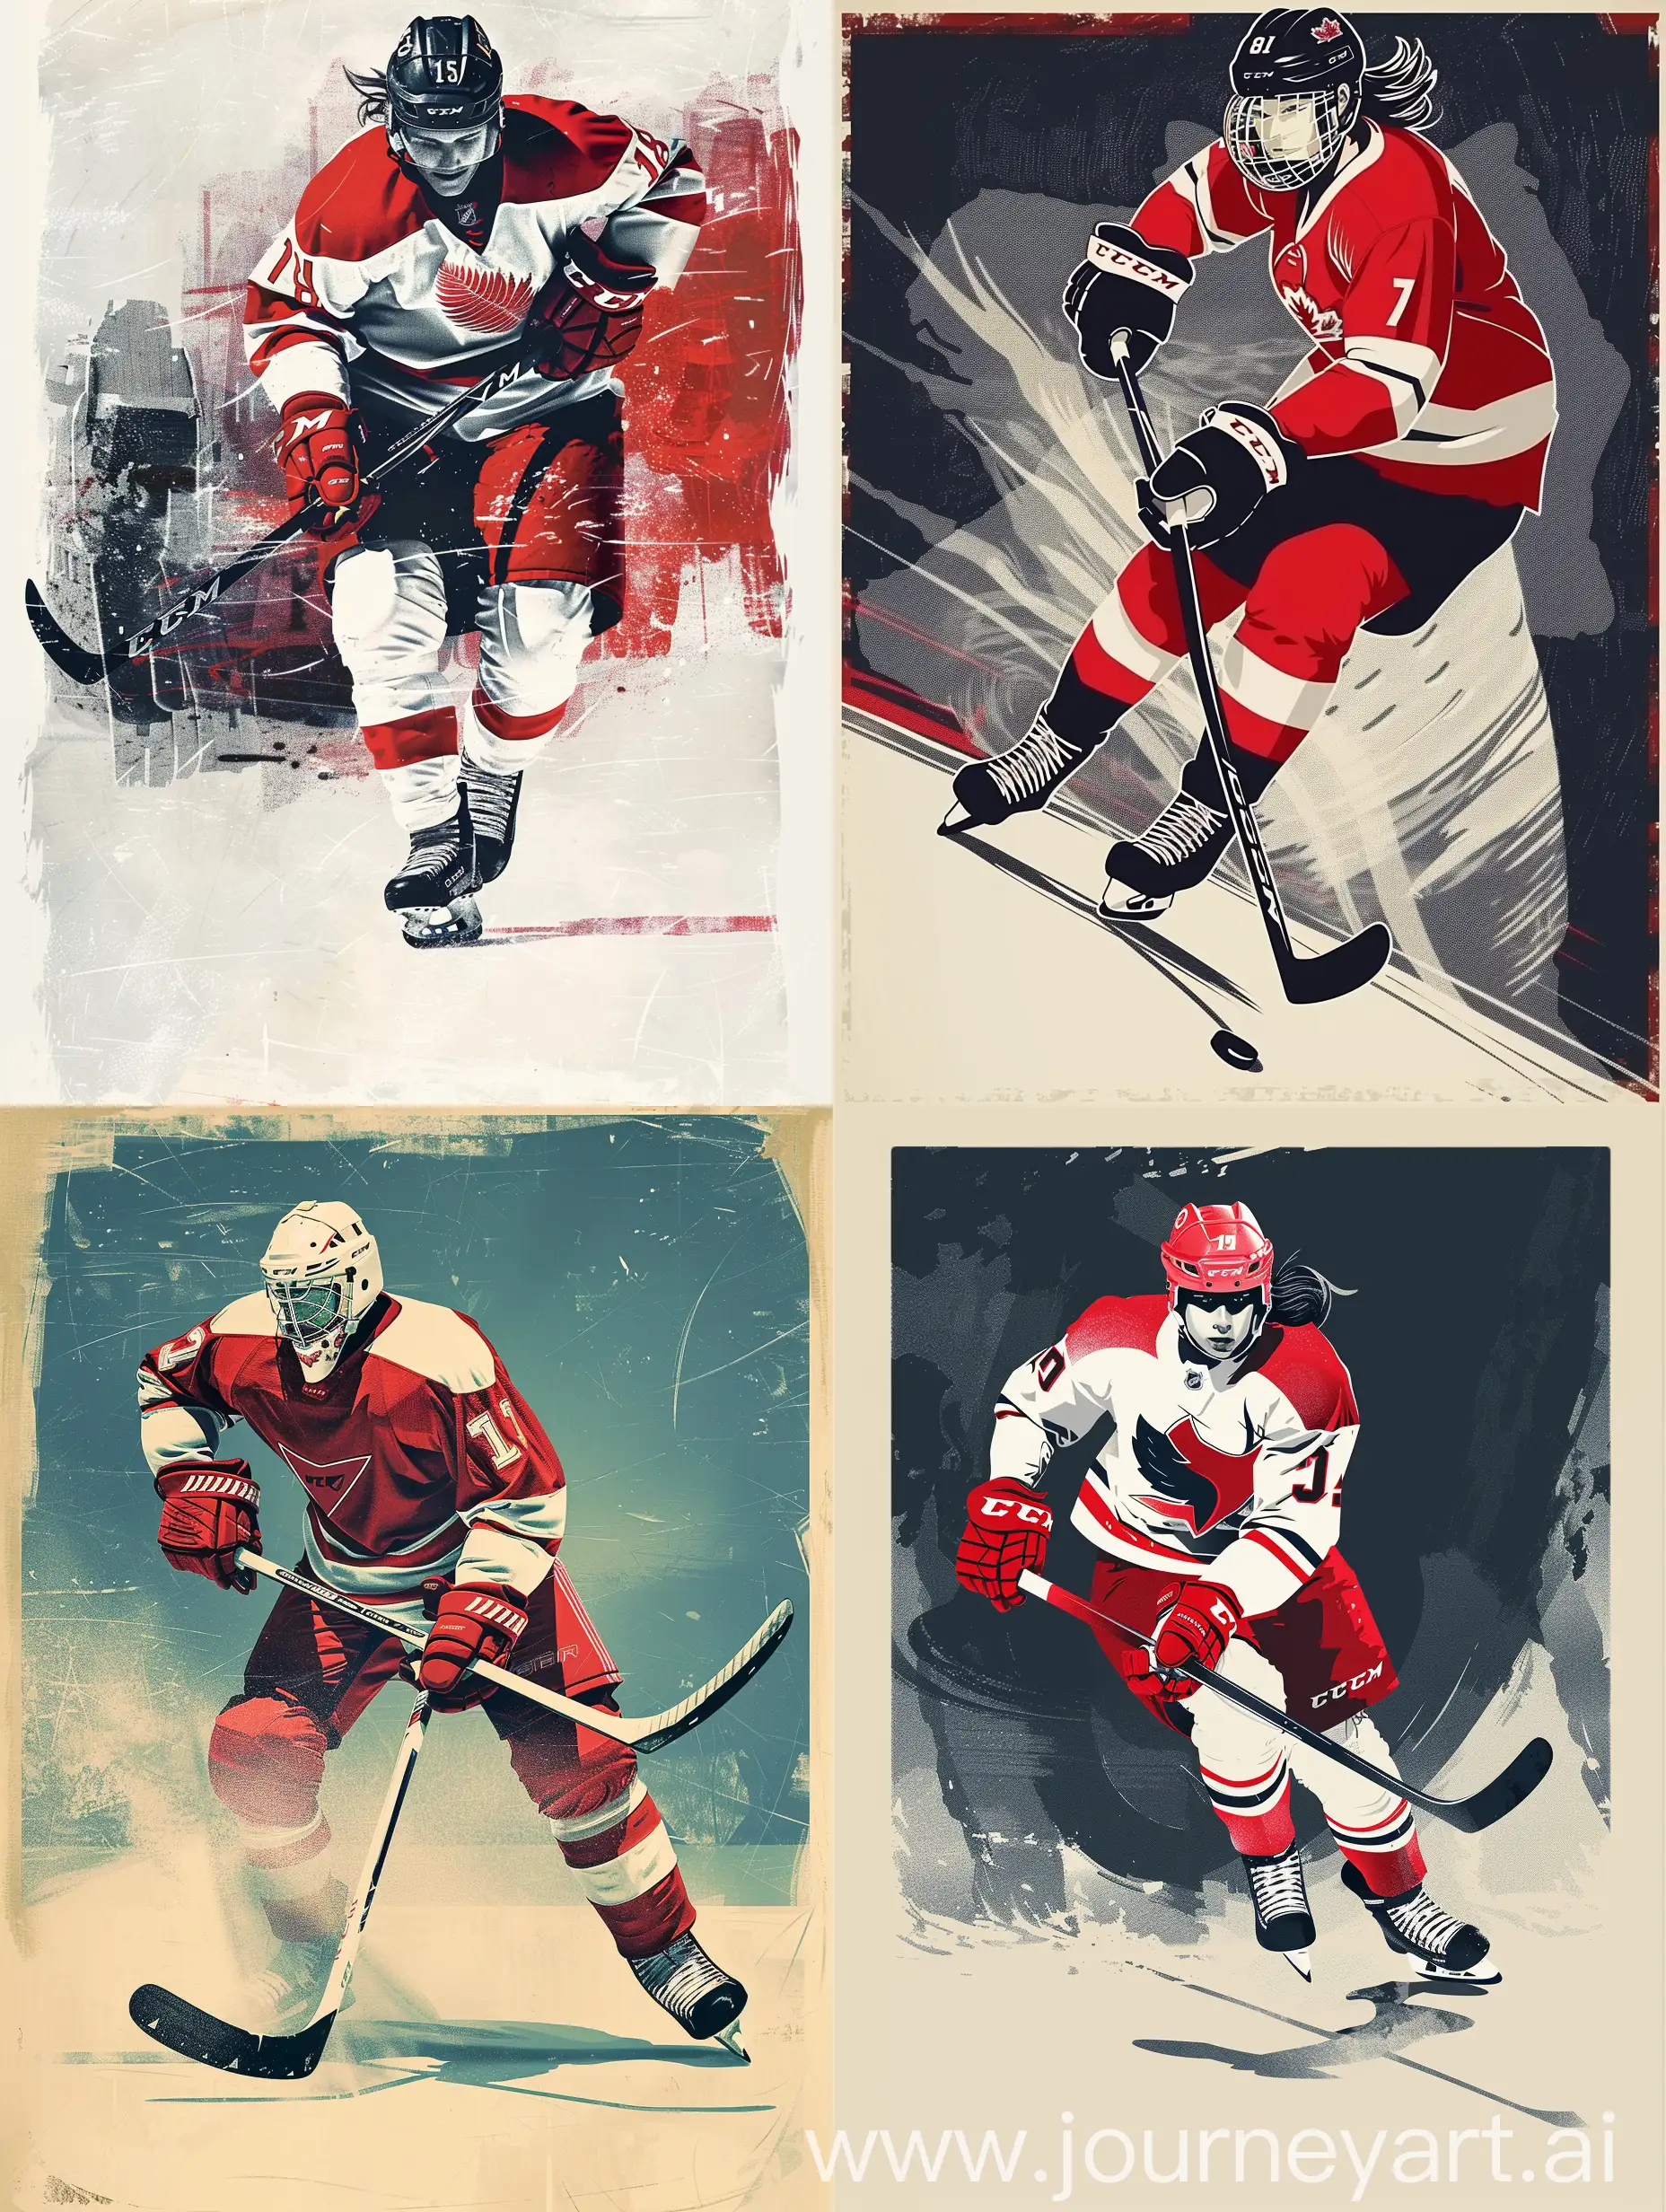 Dynamic-Ice-Hockey-Tournament-Poster-Featuring-Player-in-Striking-Red-and-White-Uniform